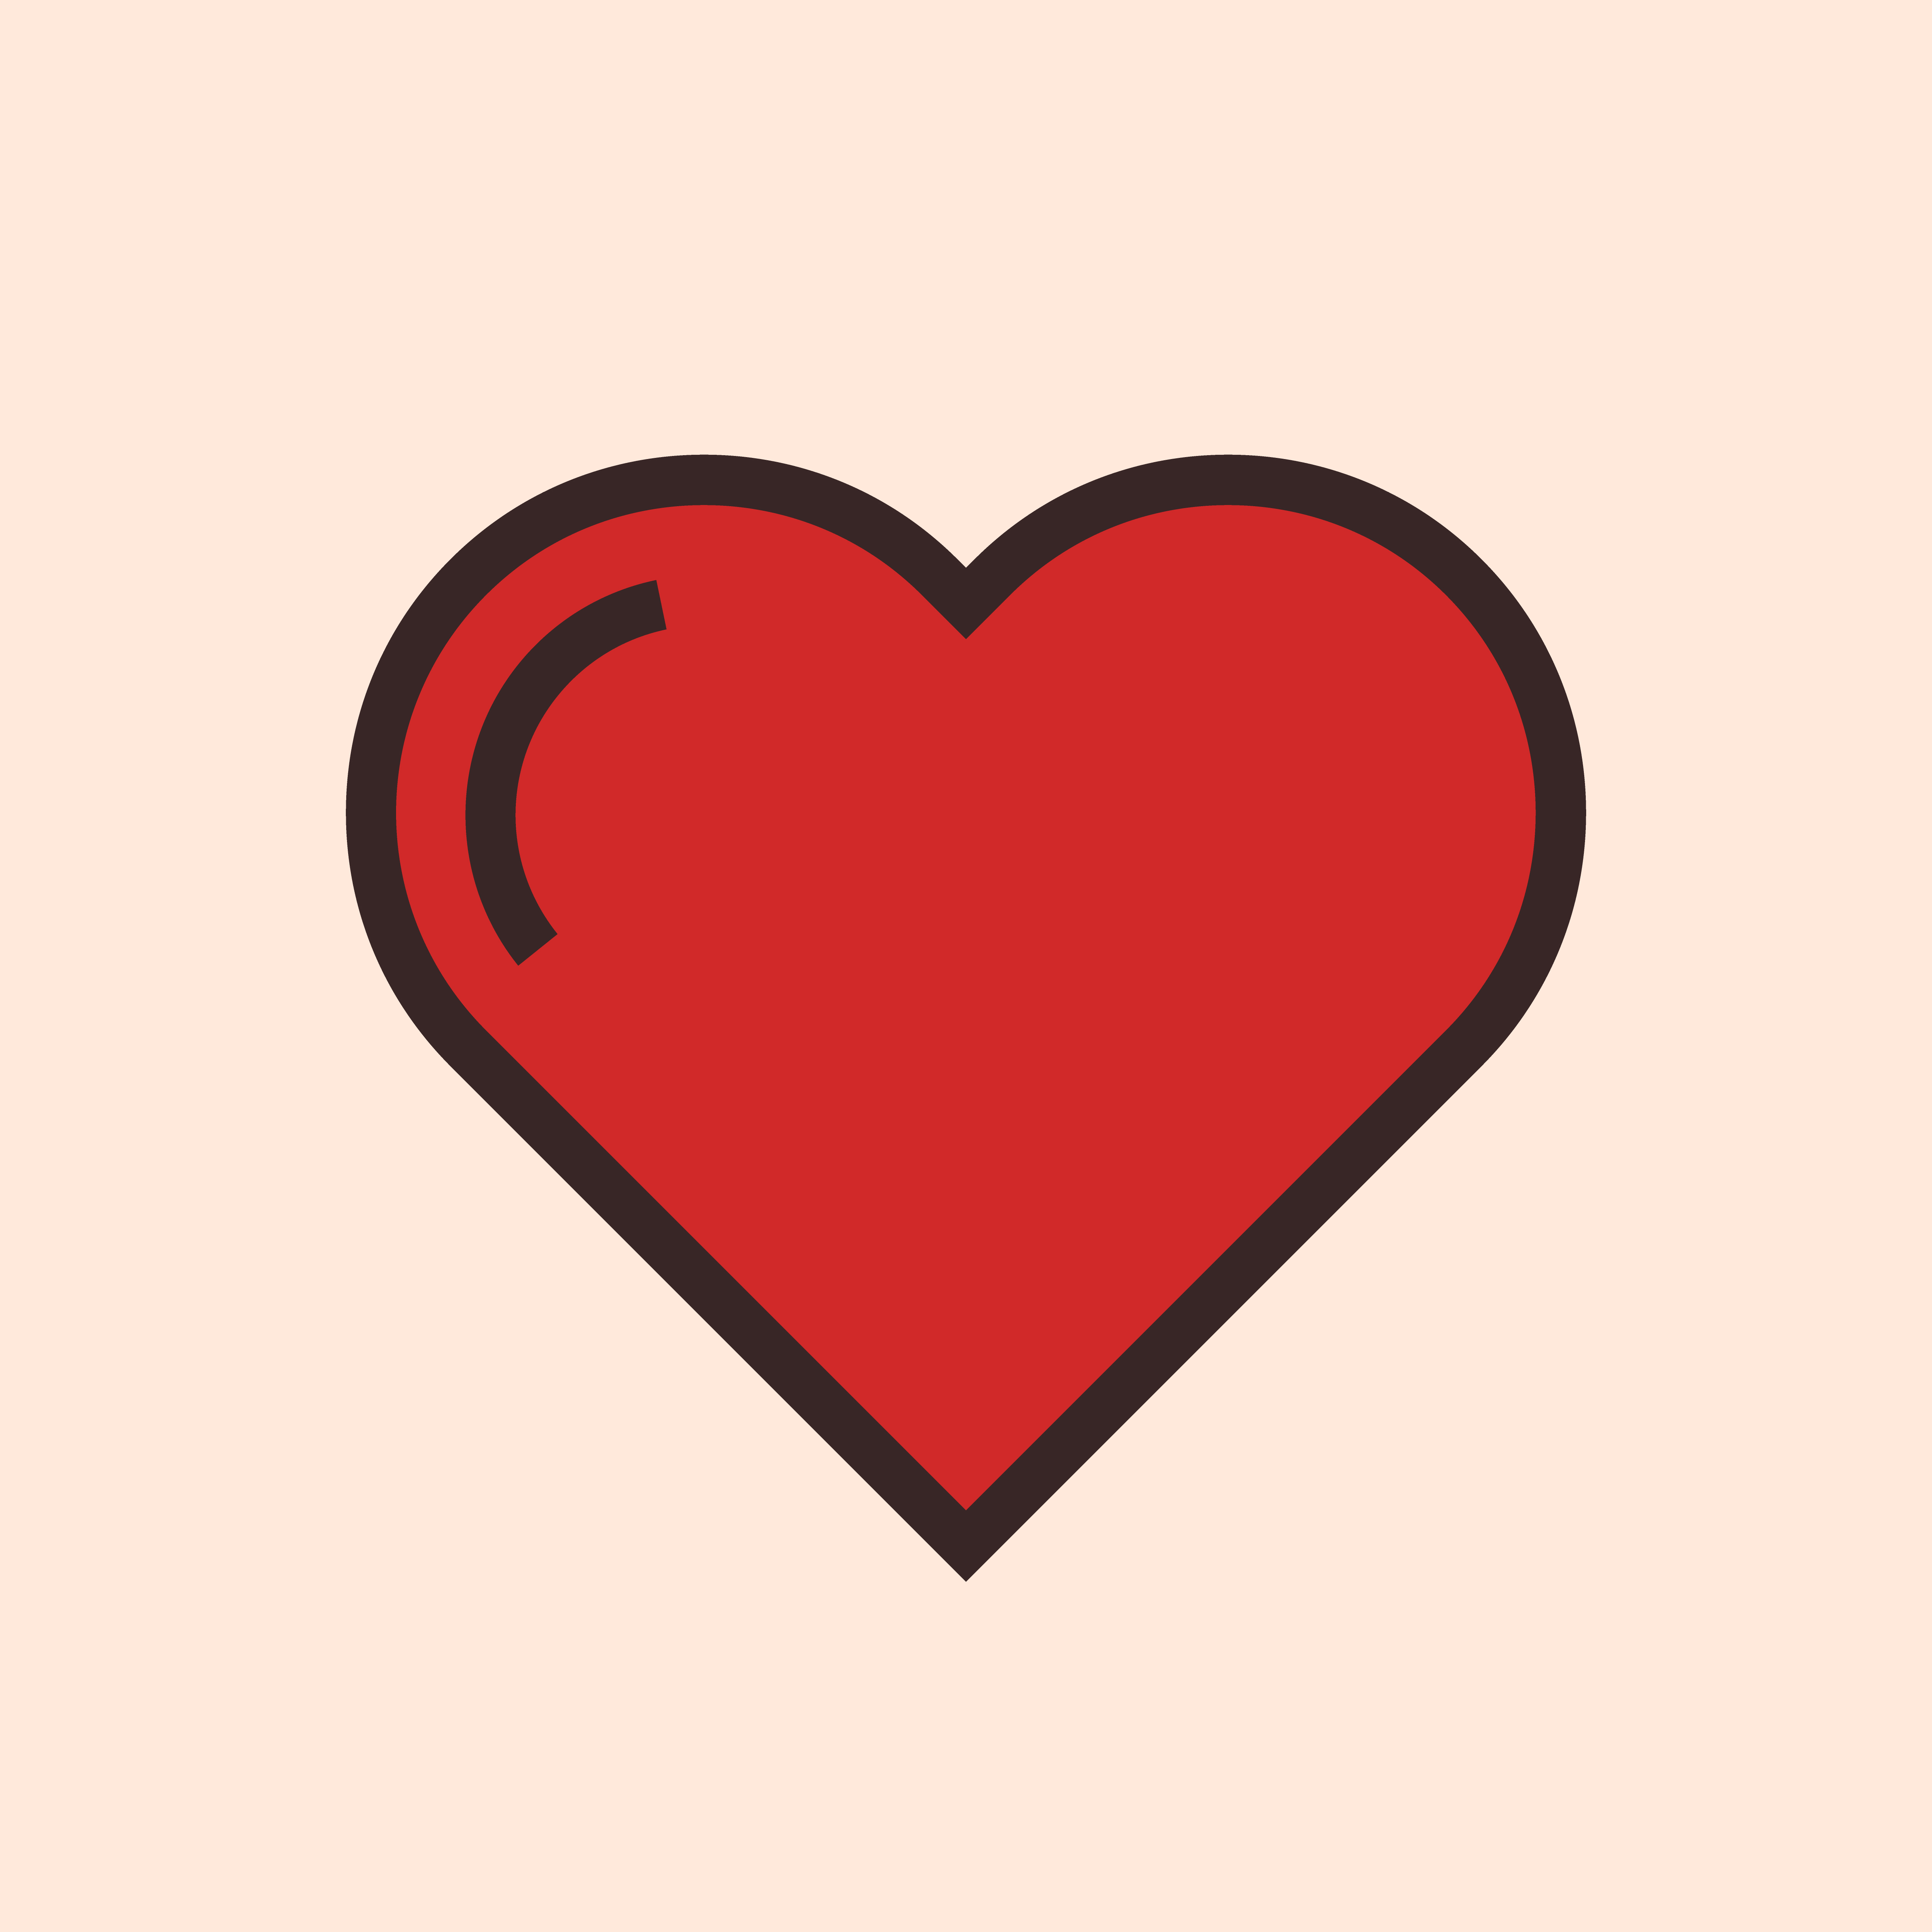 Heart_outline_color_icon__modern_minimal_flat_design_style